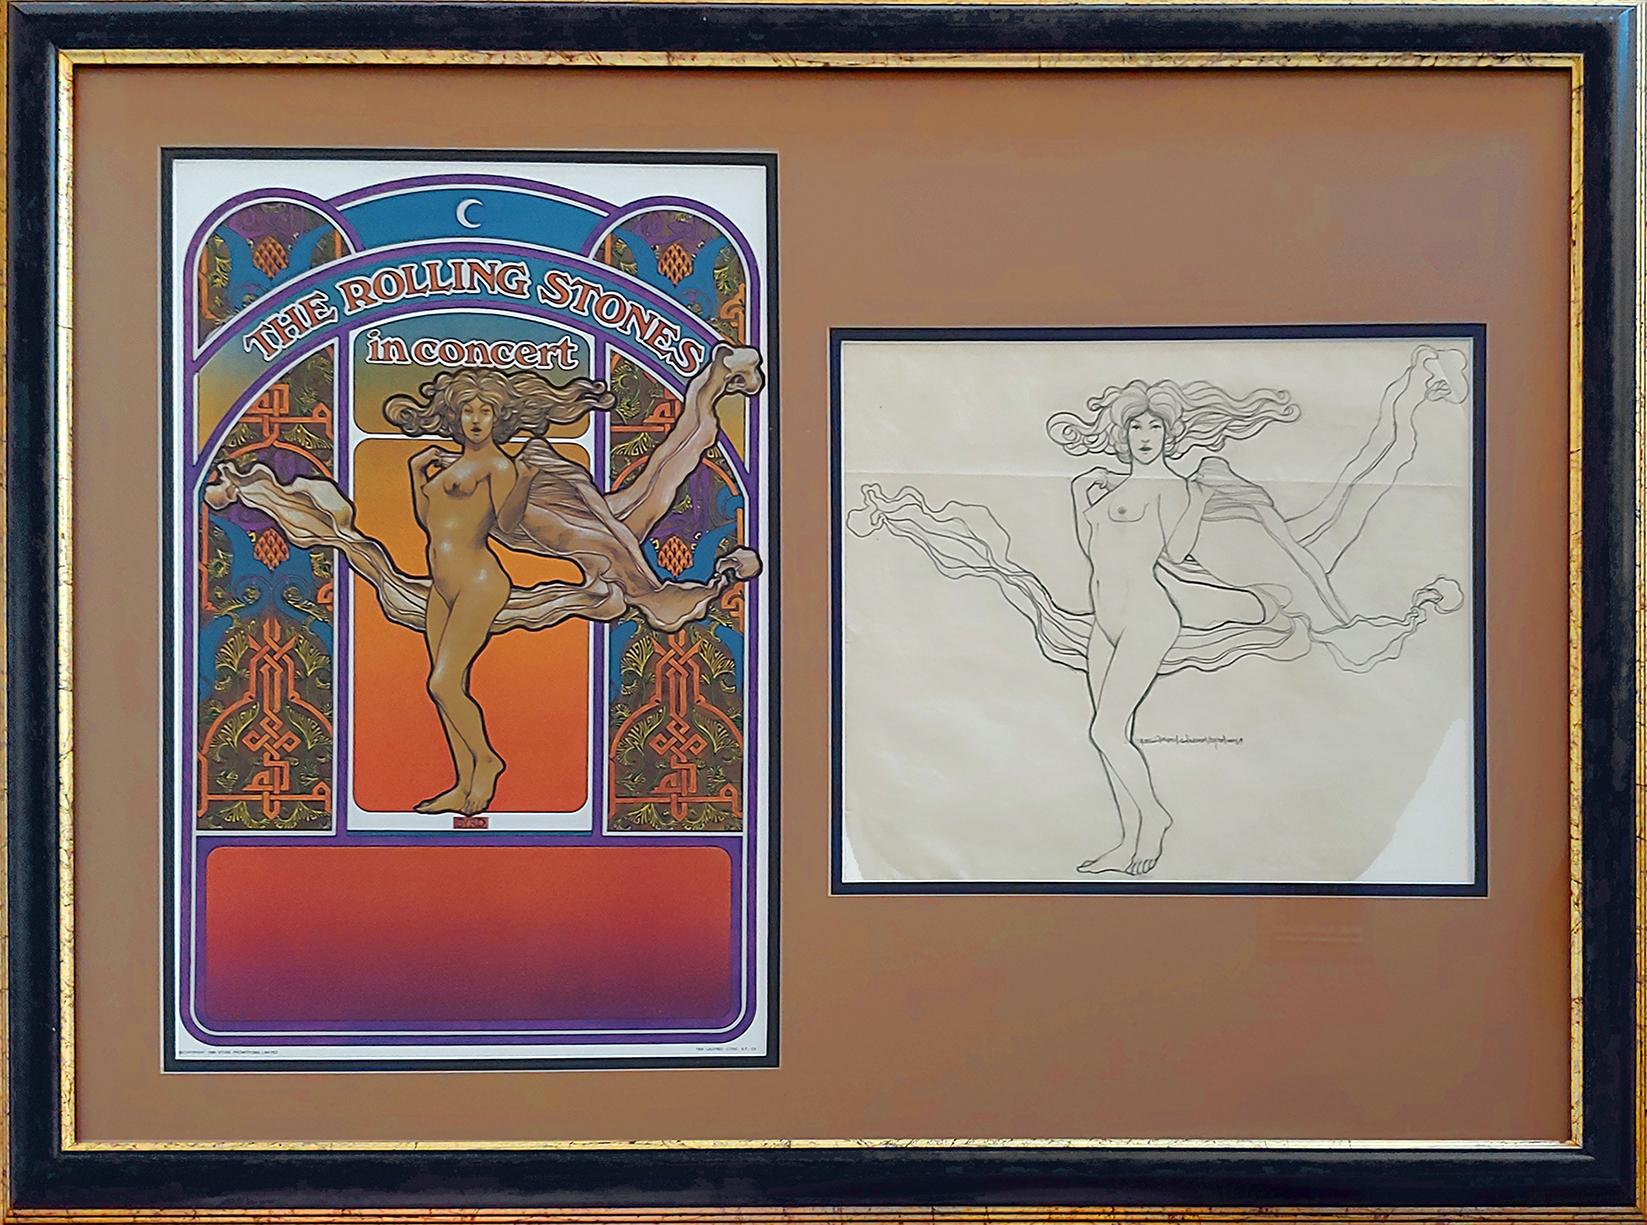 David Edward Byrd  Figurative Art - Rolling Stones original 1969 Naked Lady drawing from the Concert tour Poster